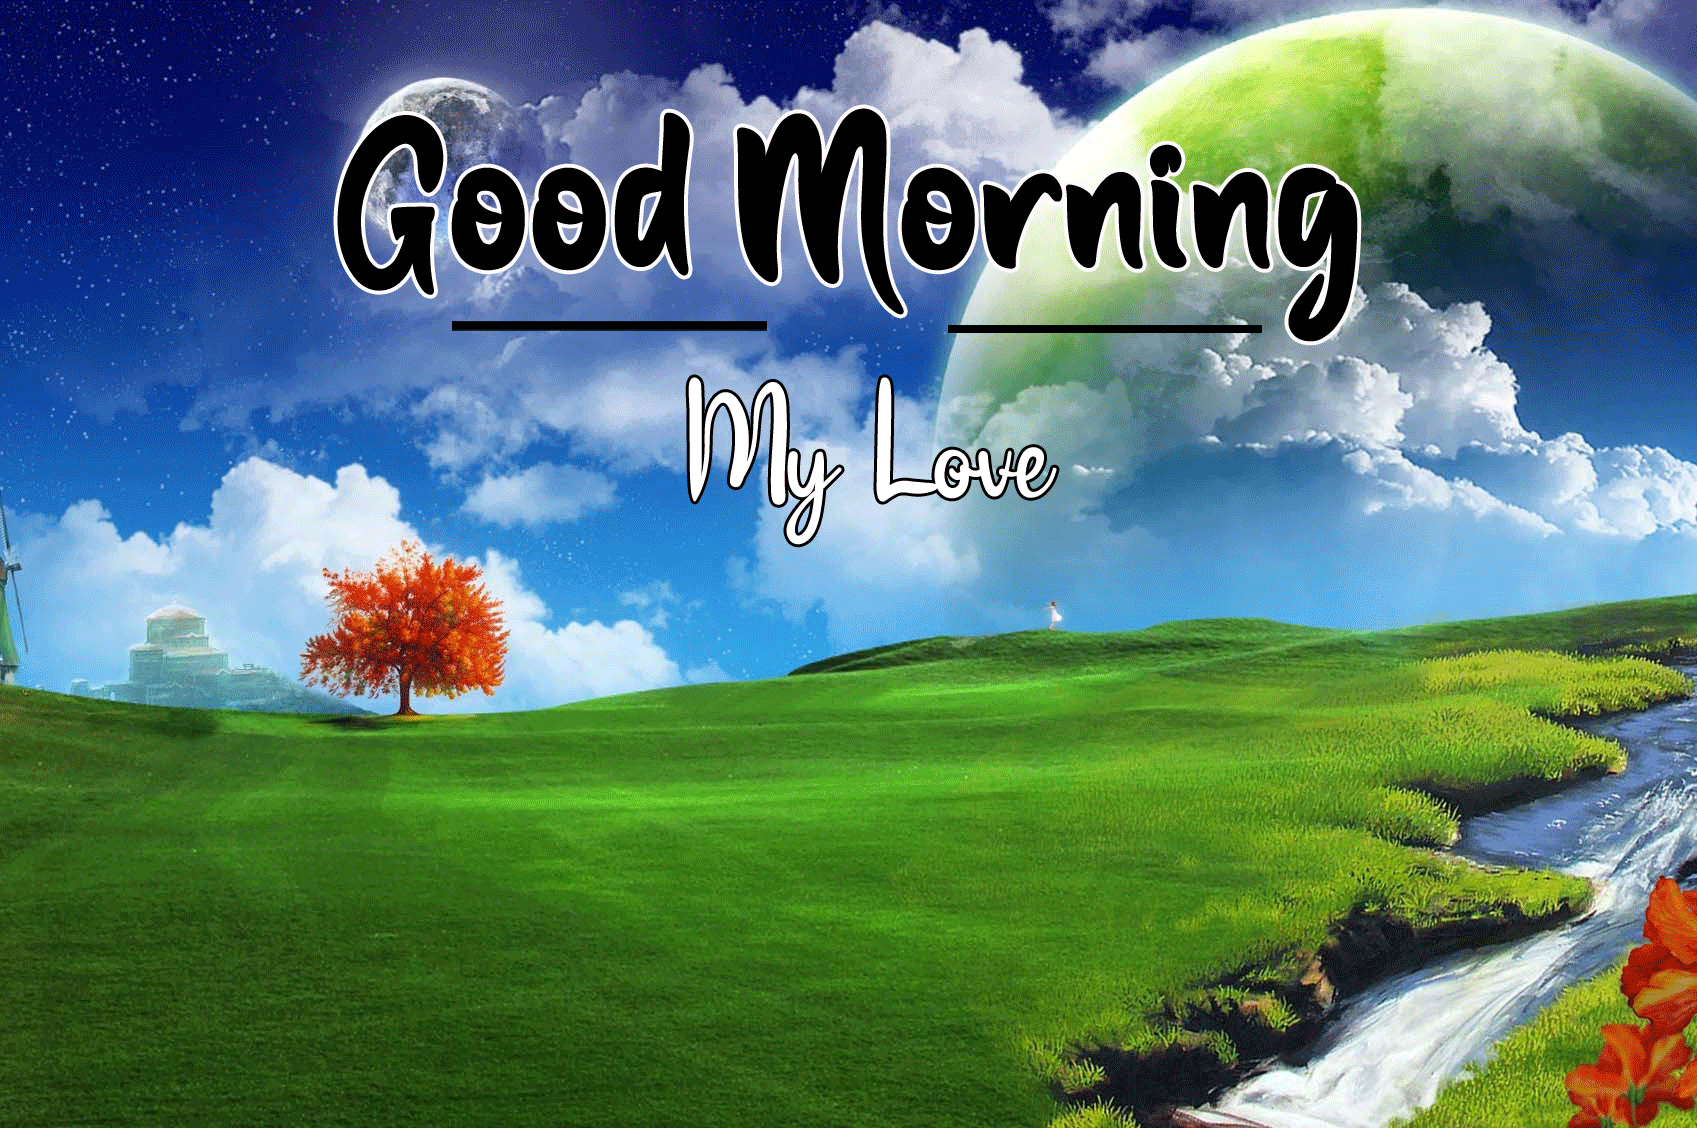 Good Morning Images Download Wallpapers